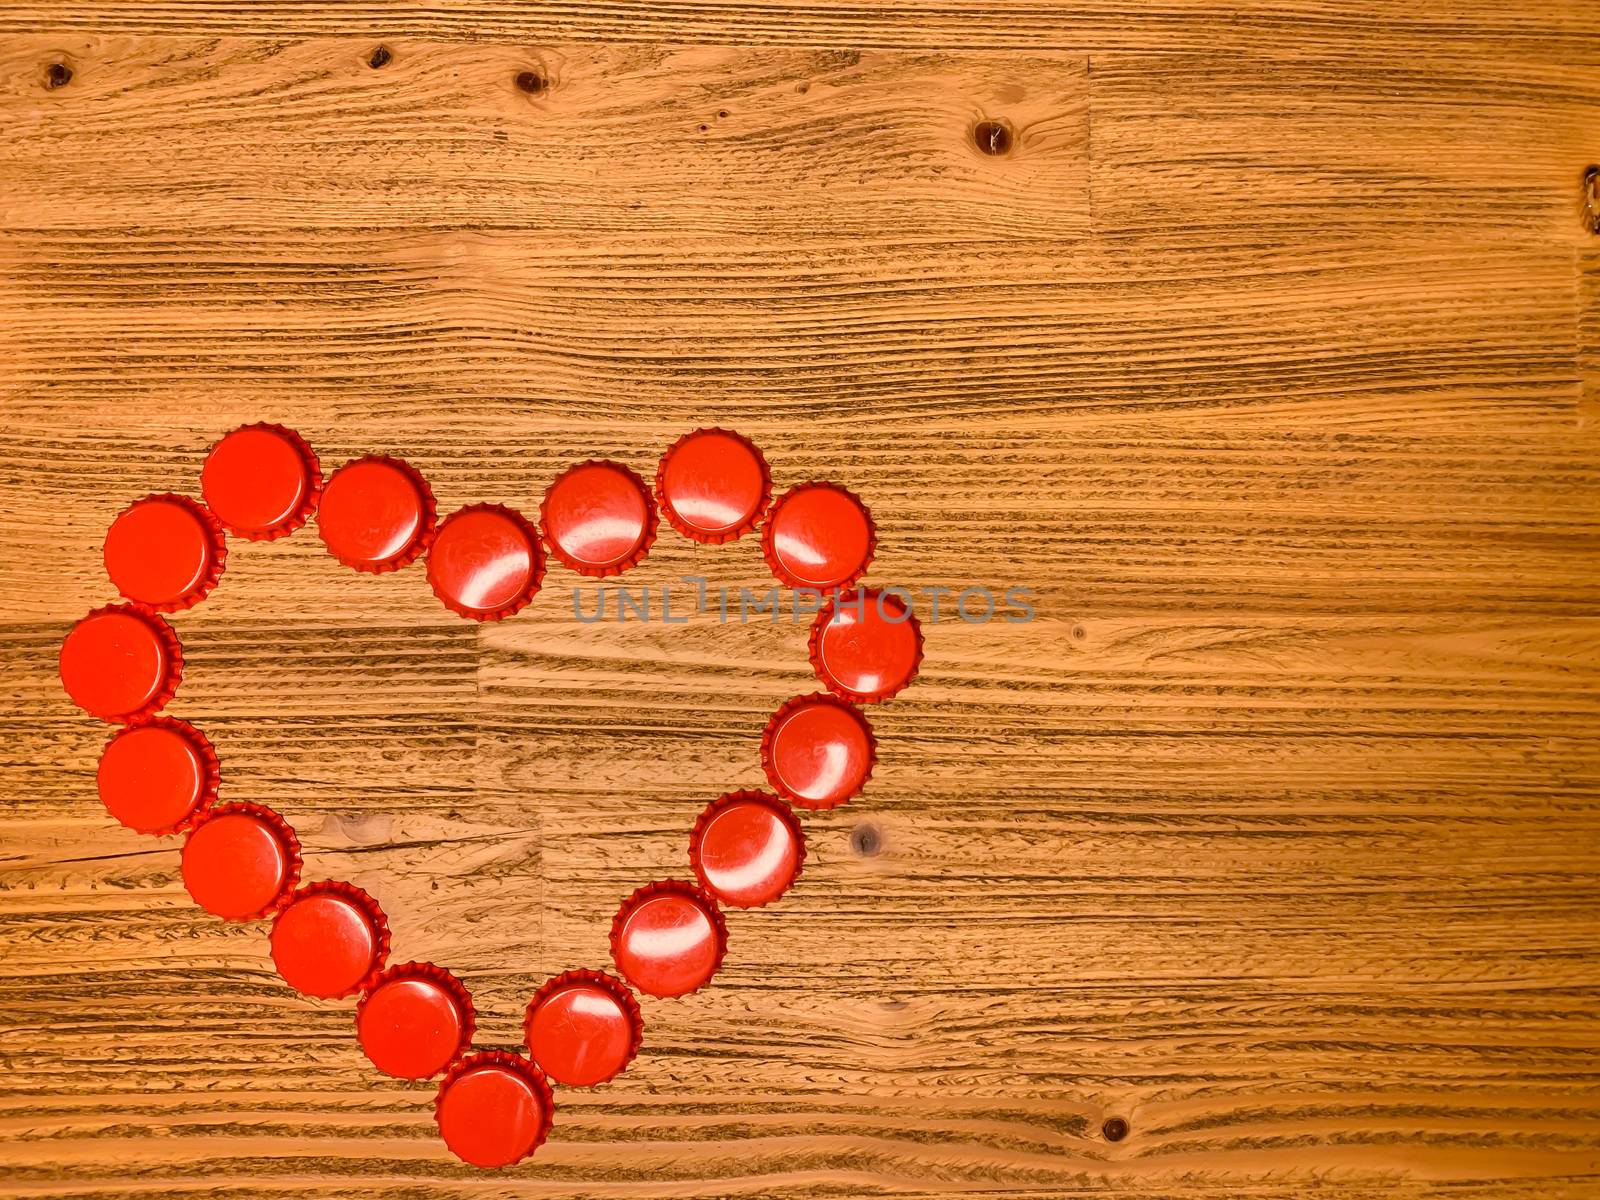 Red love heart made from beer bottle tops lids on a rustic wooden table. Beer drinkers Valentine's day concept, top view horizontal stock image with empty space for text